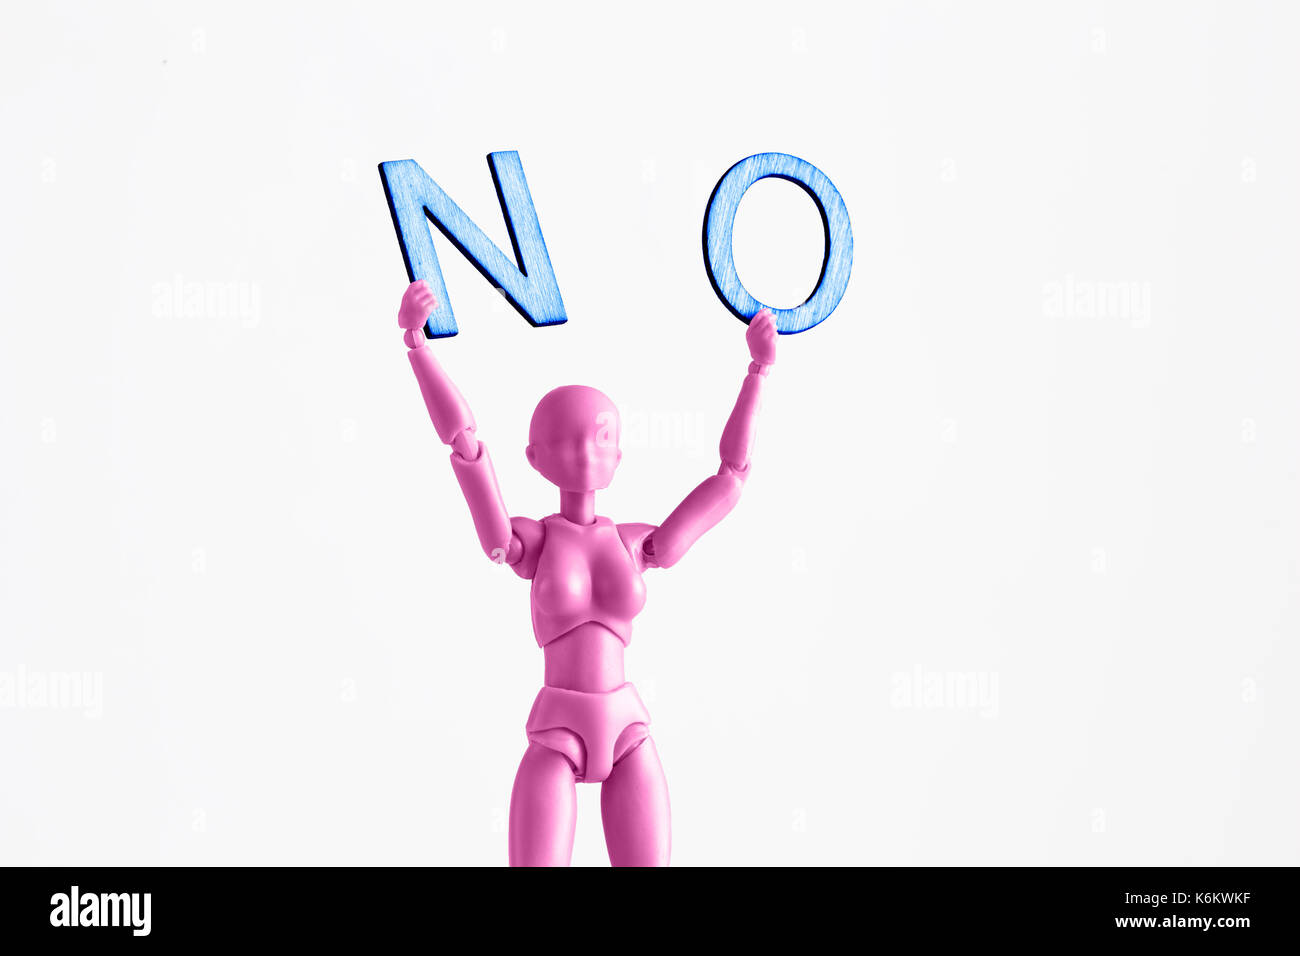 Pink female figurine closeup holding up the word NO. Isolated on white with copy space Stock Photo